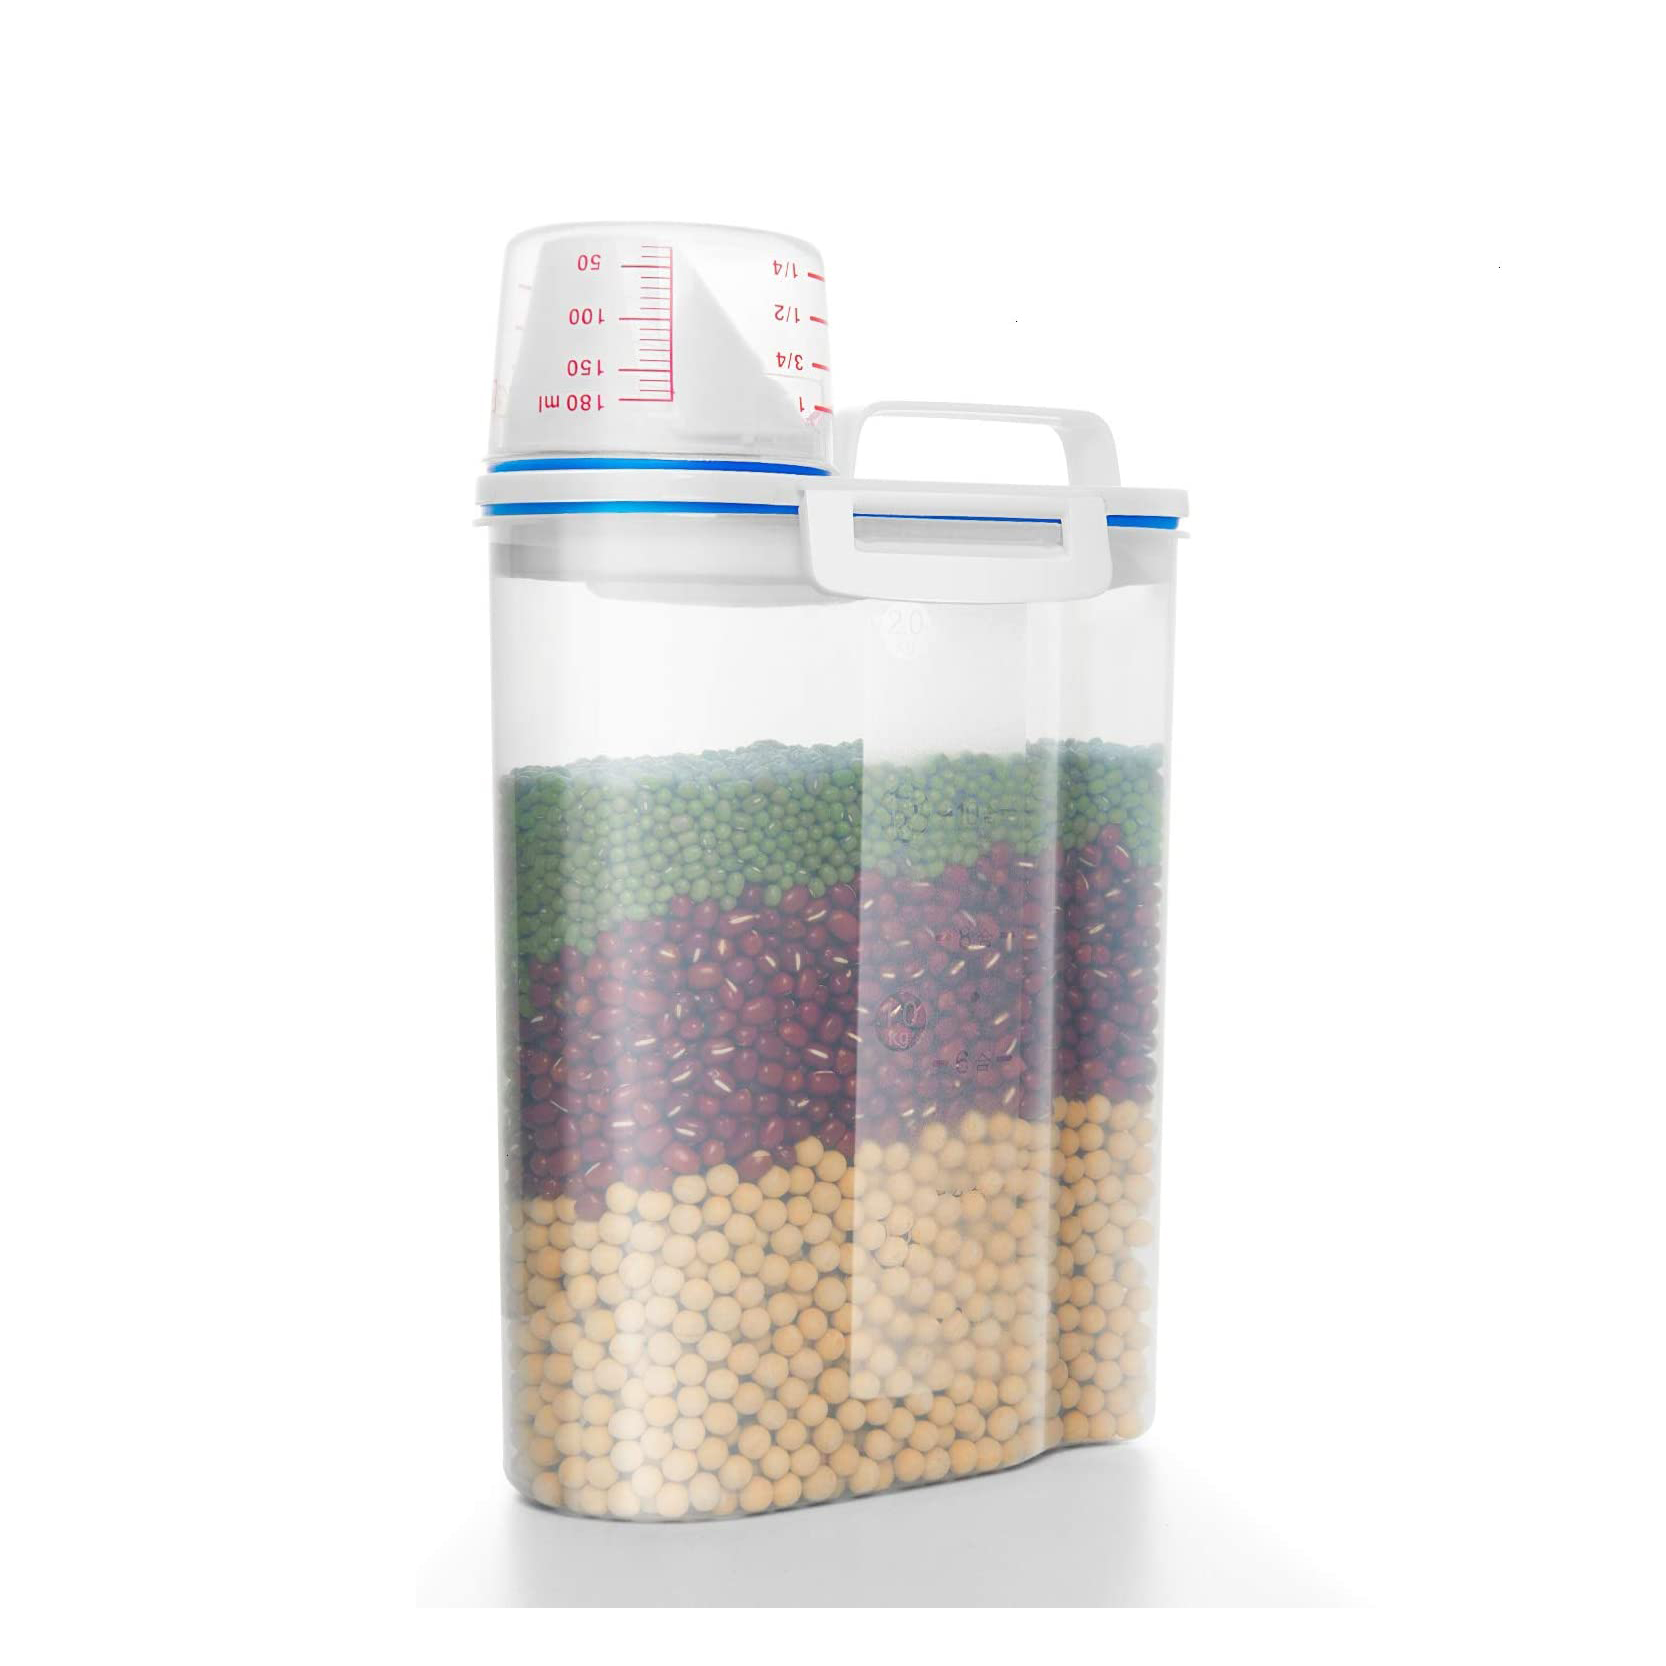 Grain Cereal Storage Containers